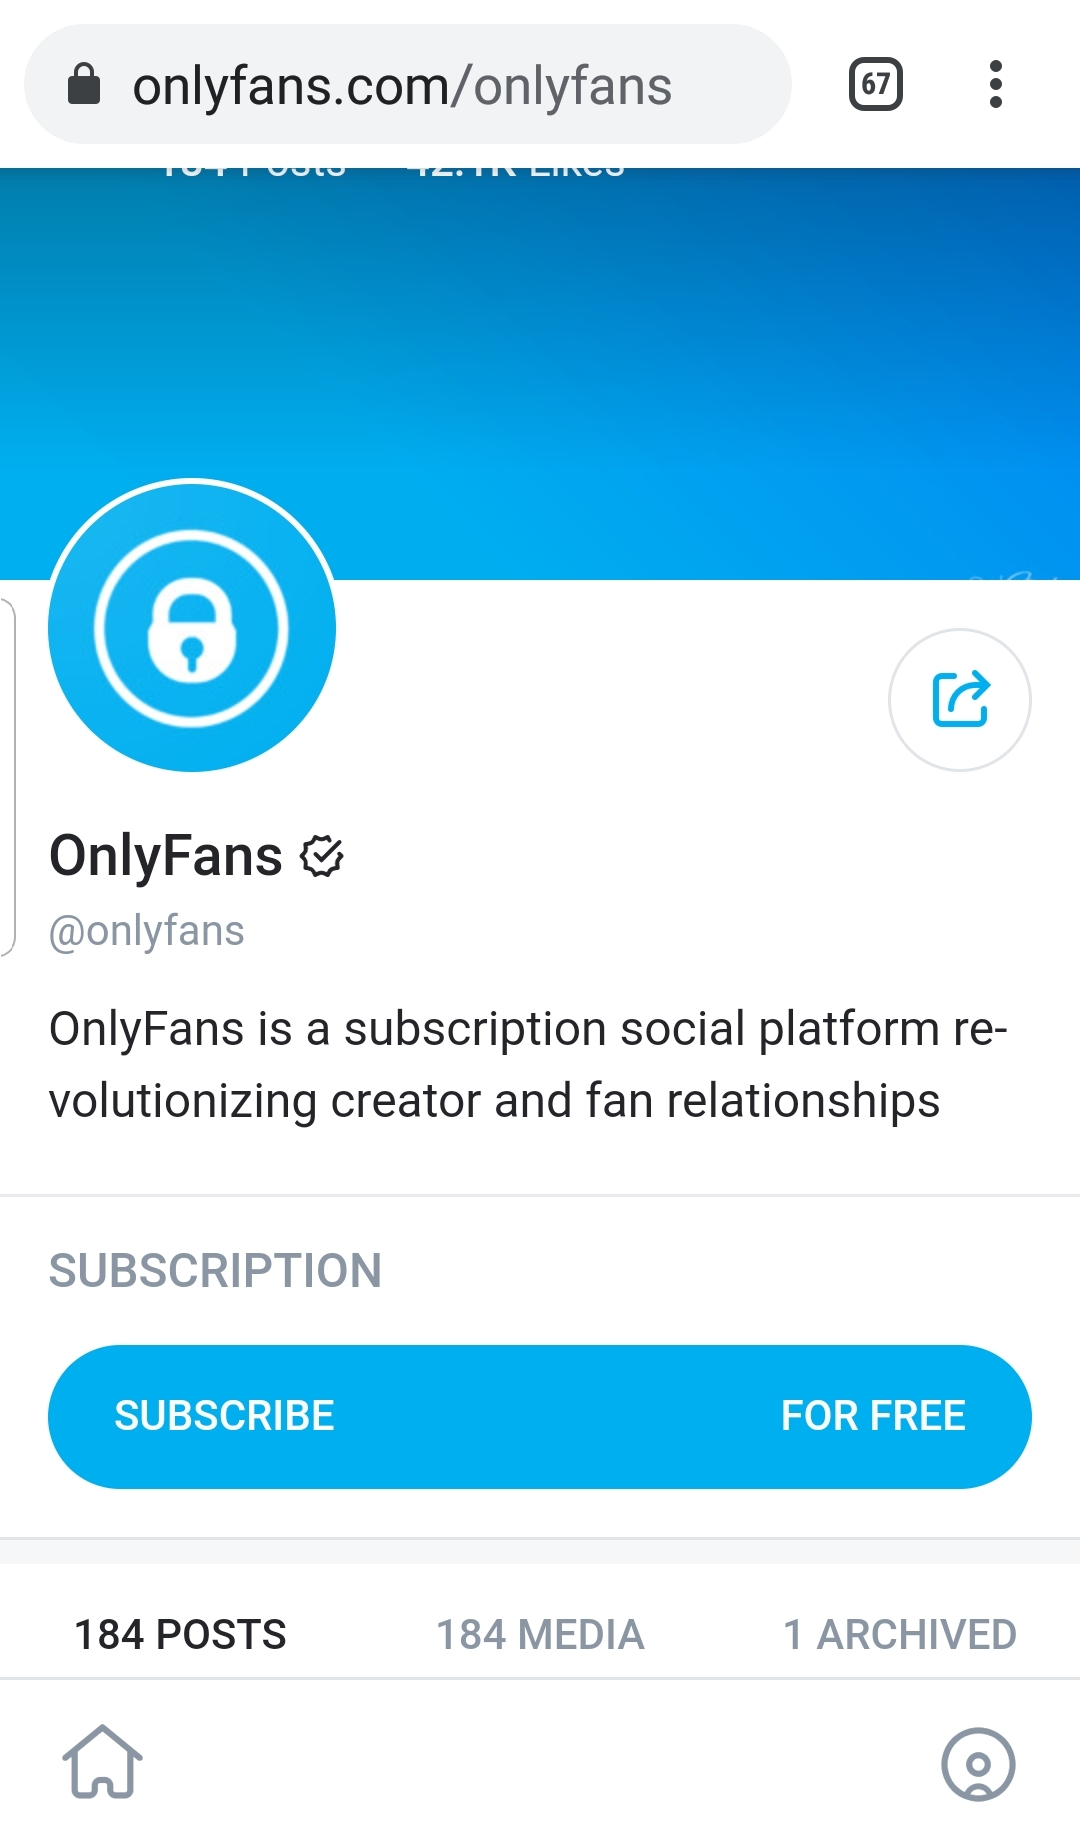 How to cancel subscription on onlyfans